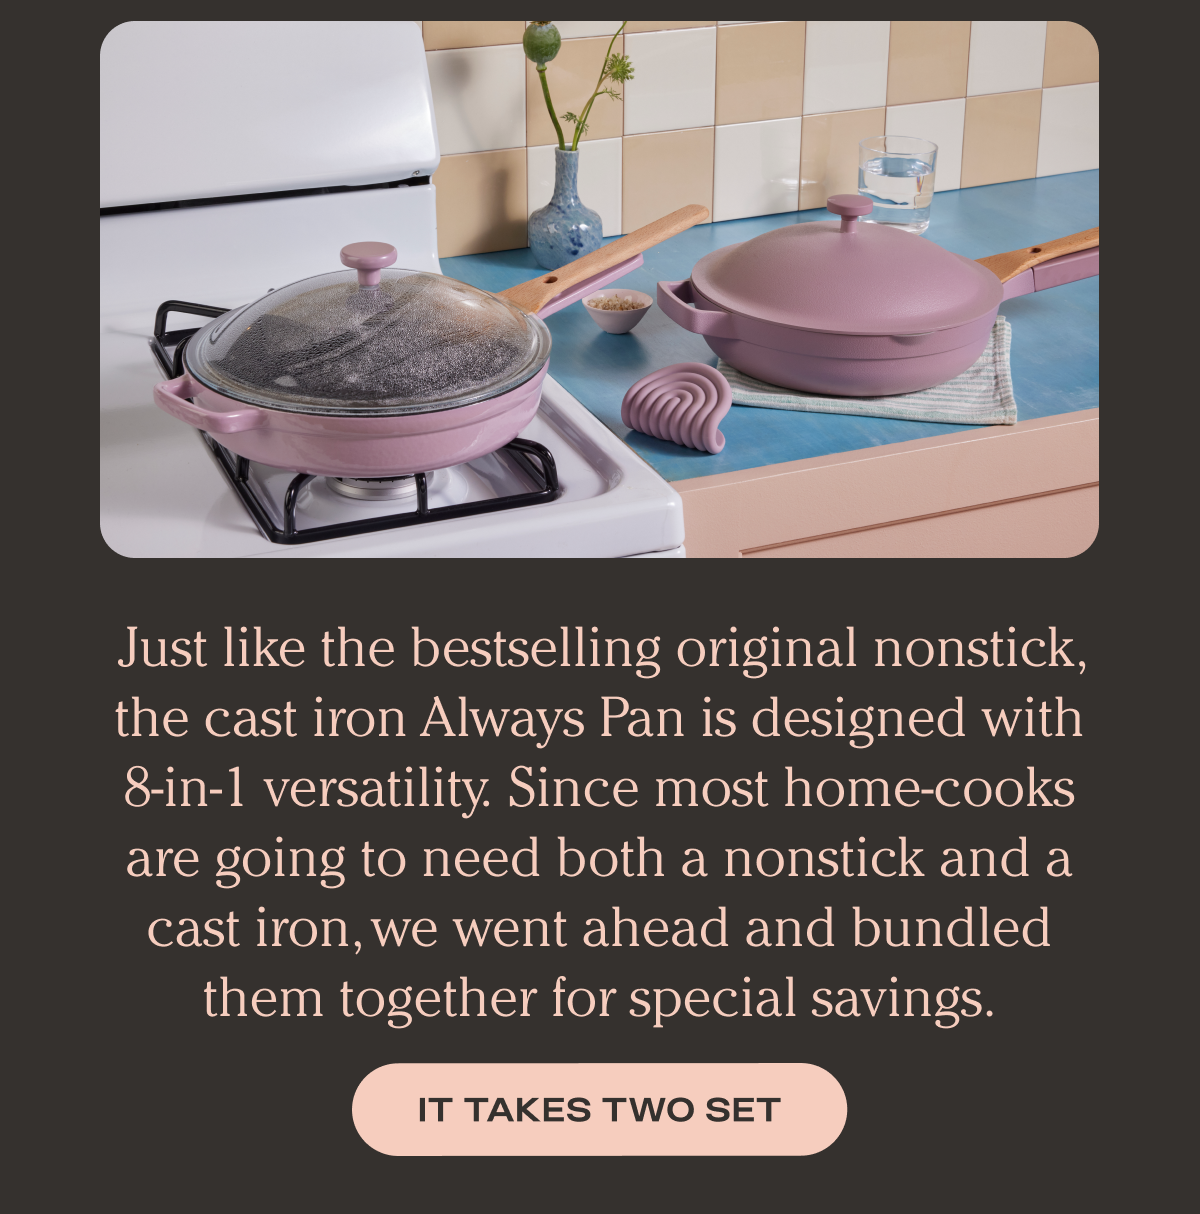 Just like the bestselling original nonstick, the cast iron Always Pan is designed with 8-in-1 versatility. Since most home-cooks are going to need both a nonstick and a cast iron, we went ahead and bundled them together for special savings. - It Takes Two Set